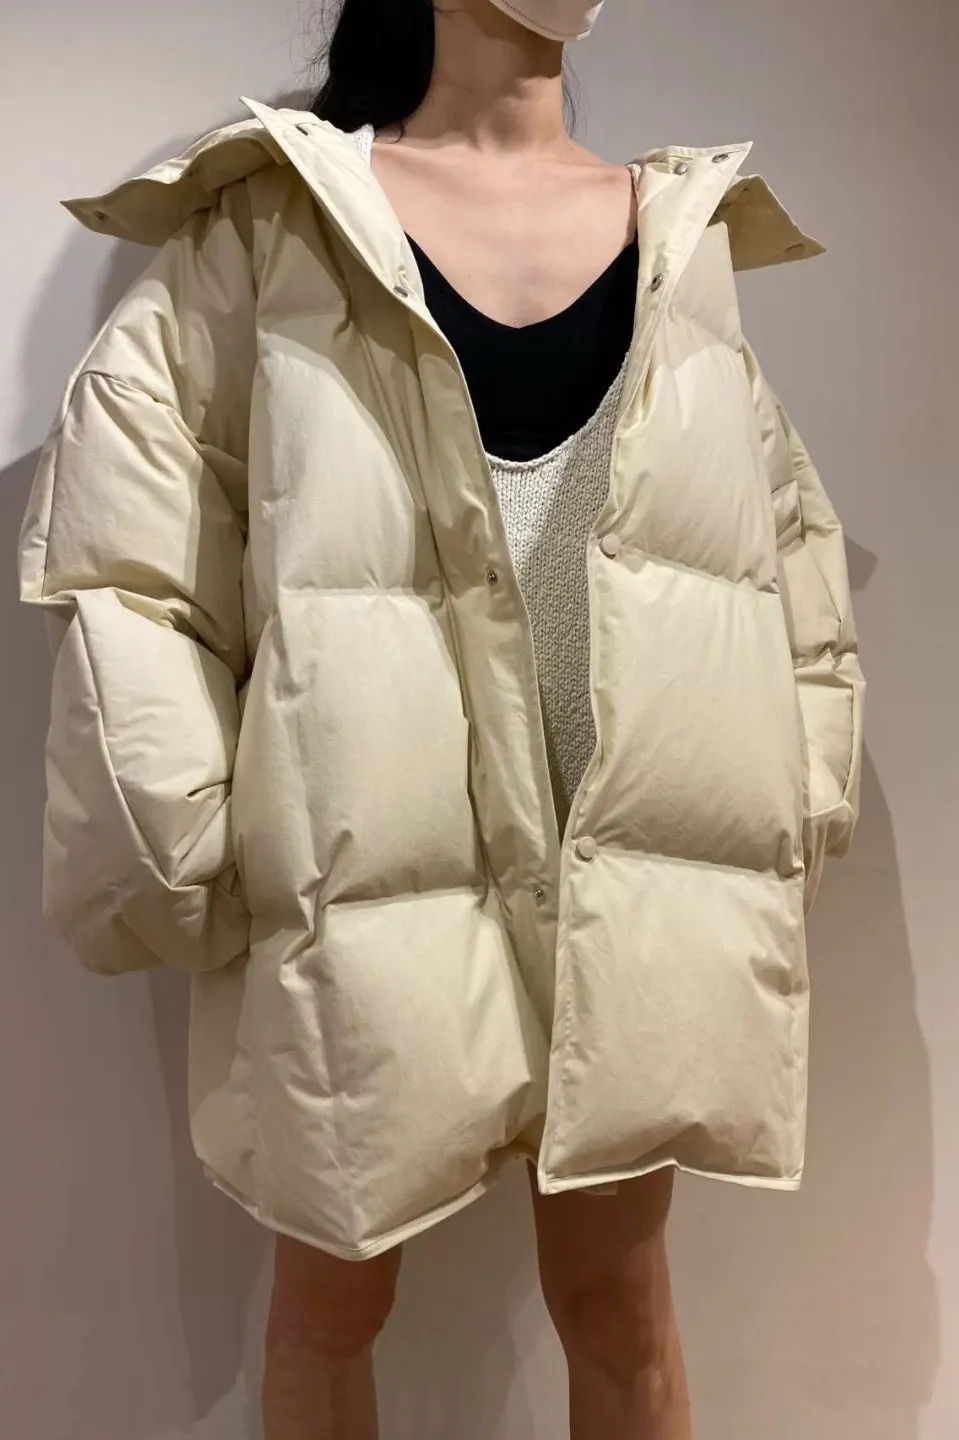 Novo Outono Outono Winter White Duck Down Jacket Mulheres Única Breasted Beasted Down Coat Feminino Espesso Quente Longo Down Parkas Oversize Outerwear 201023